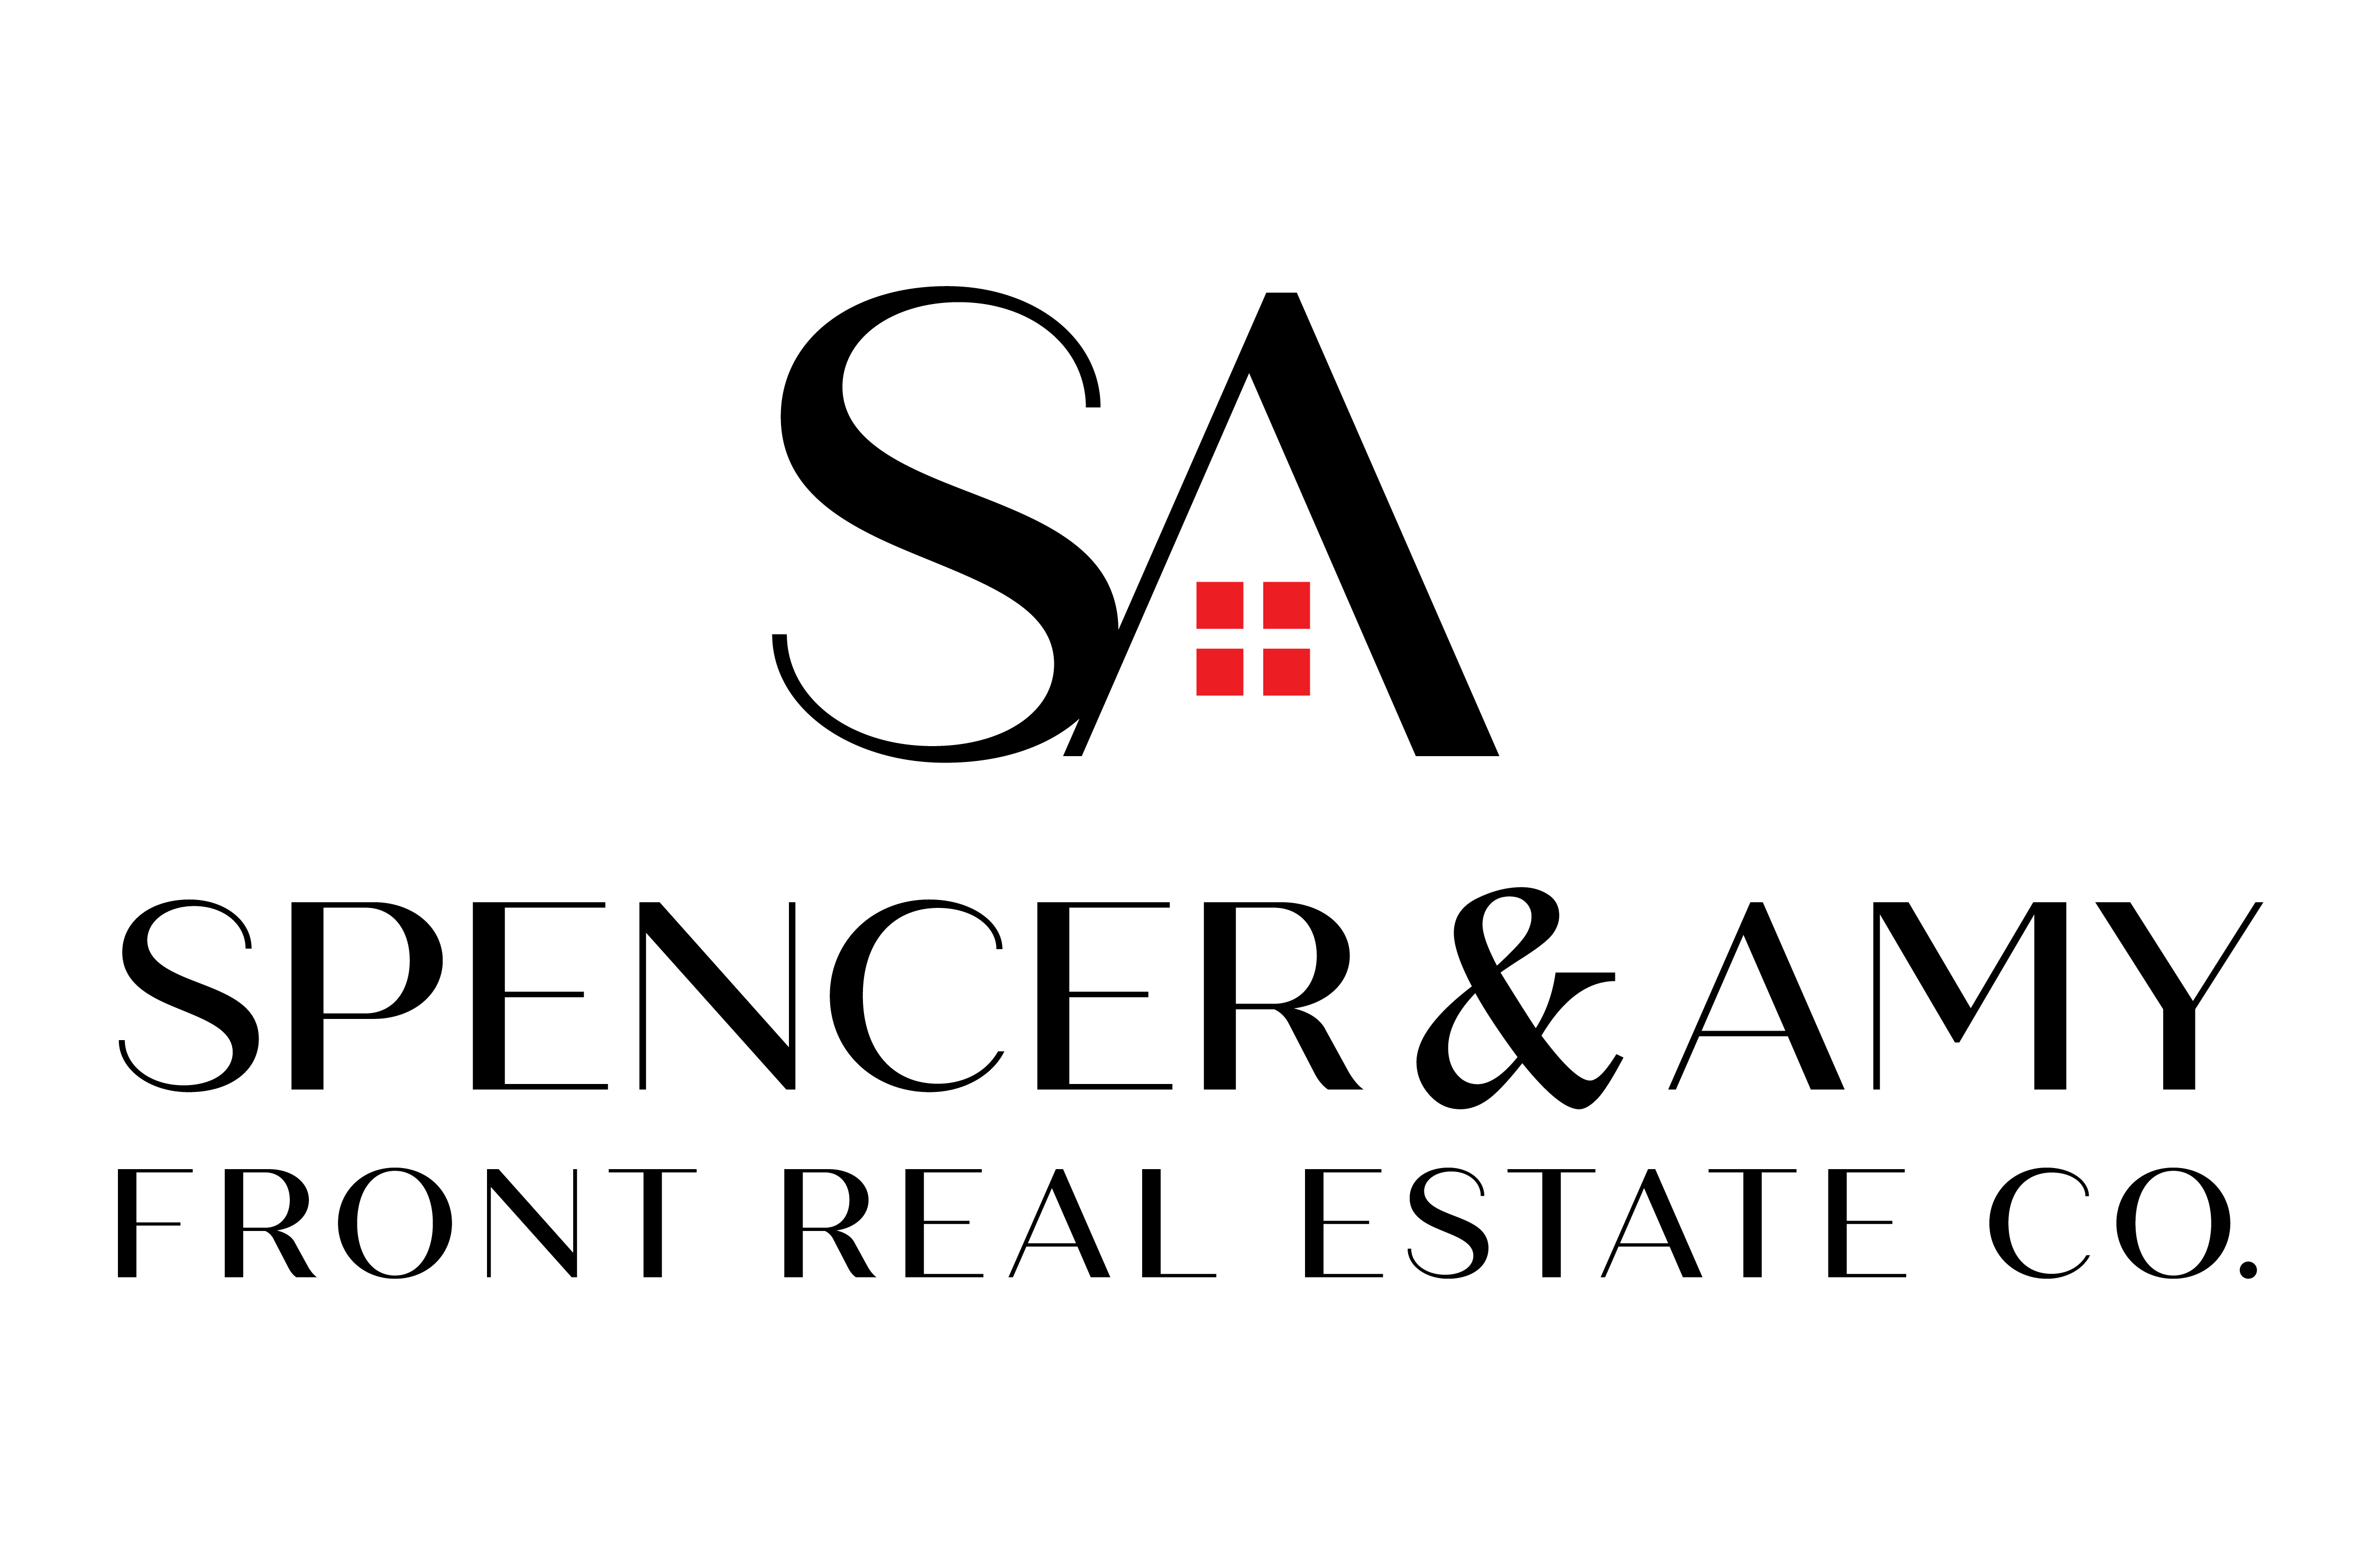 Spencer & Amy at Front Real Estate Co.